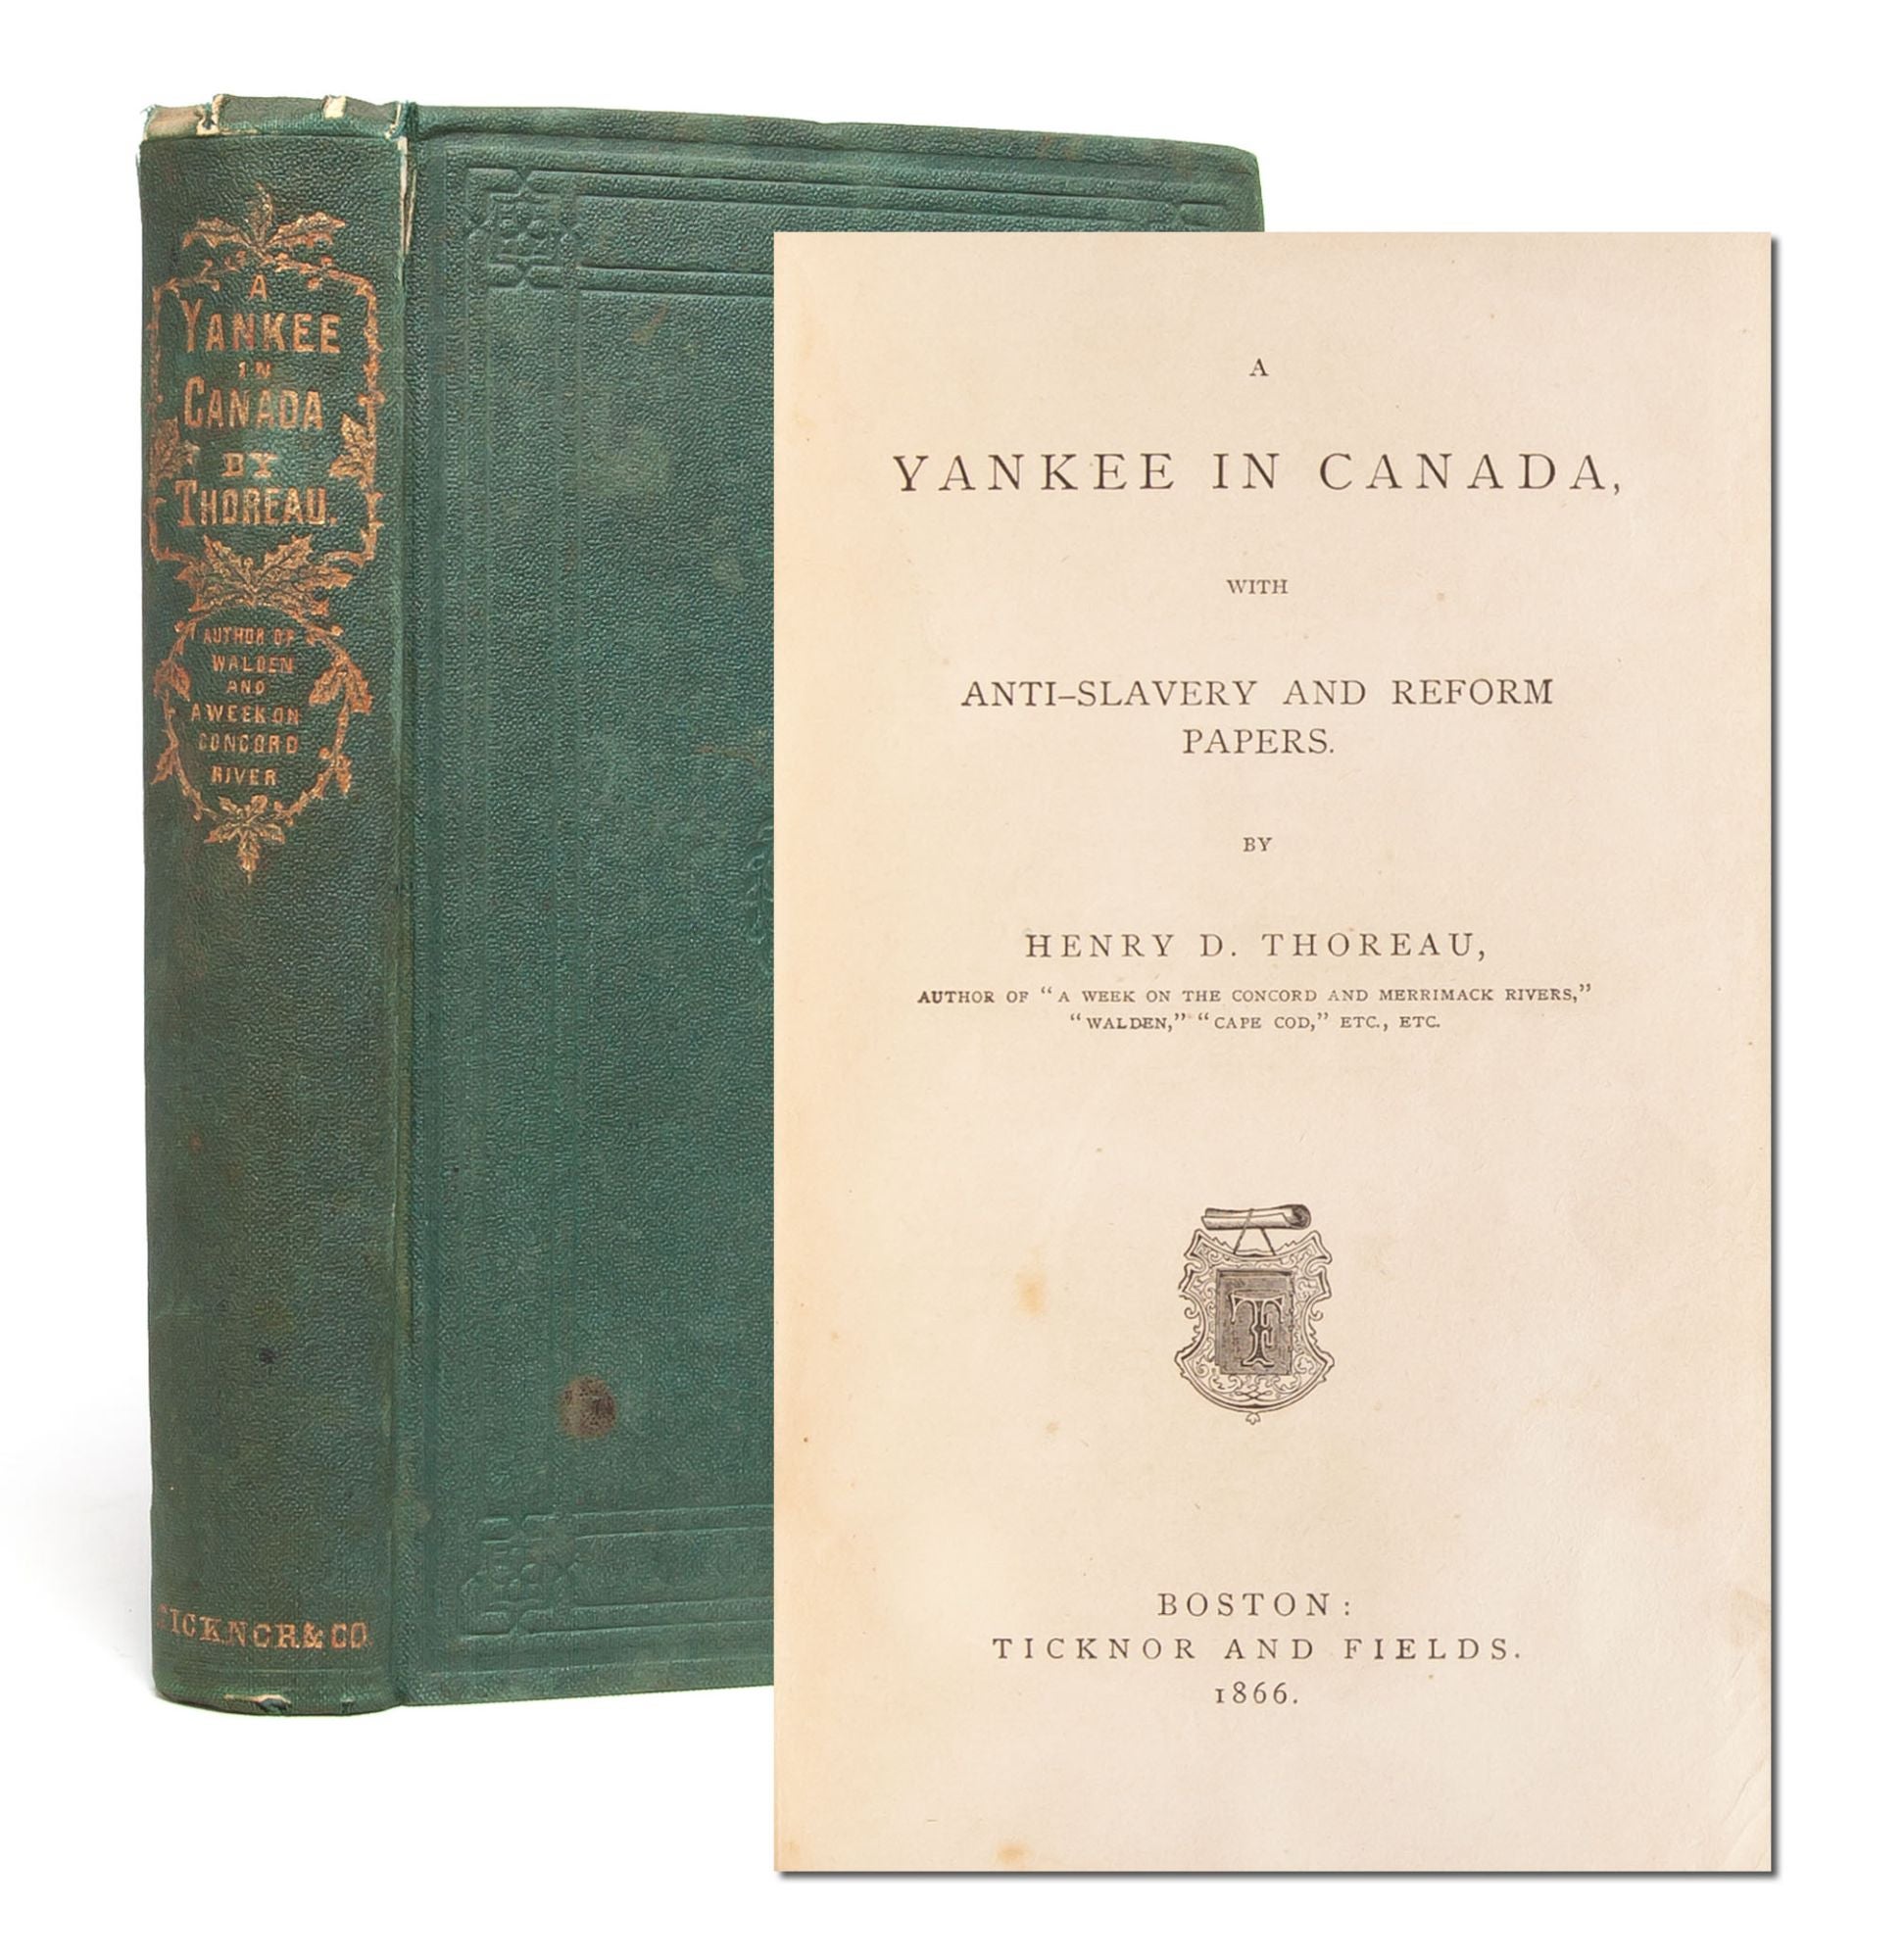 (Item #5594) A Yankee in Canada, With Anti-Slavery and Reform Papers. Henry David Thoreau.